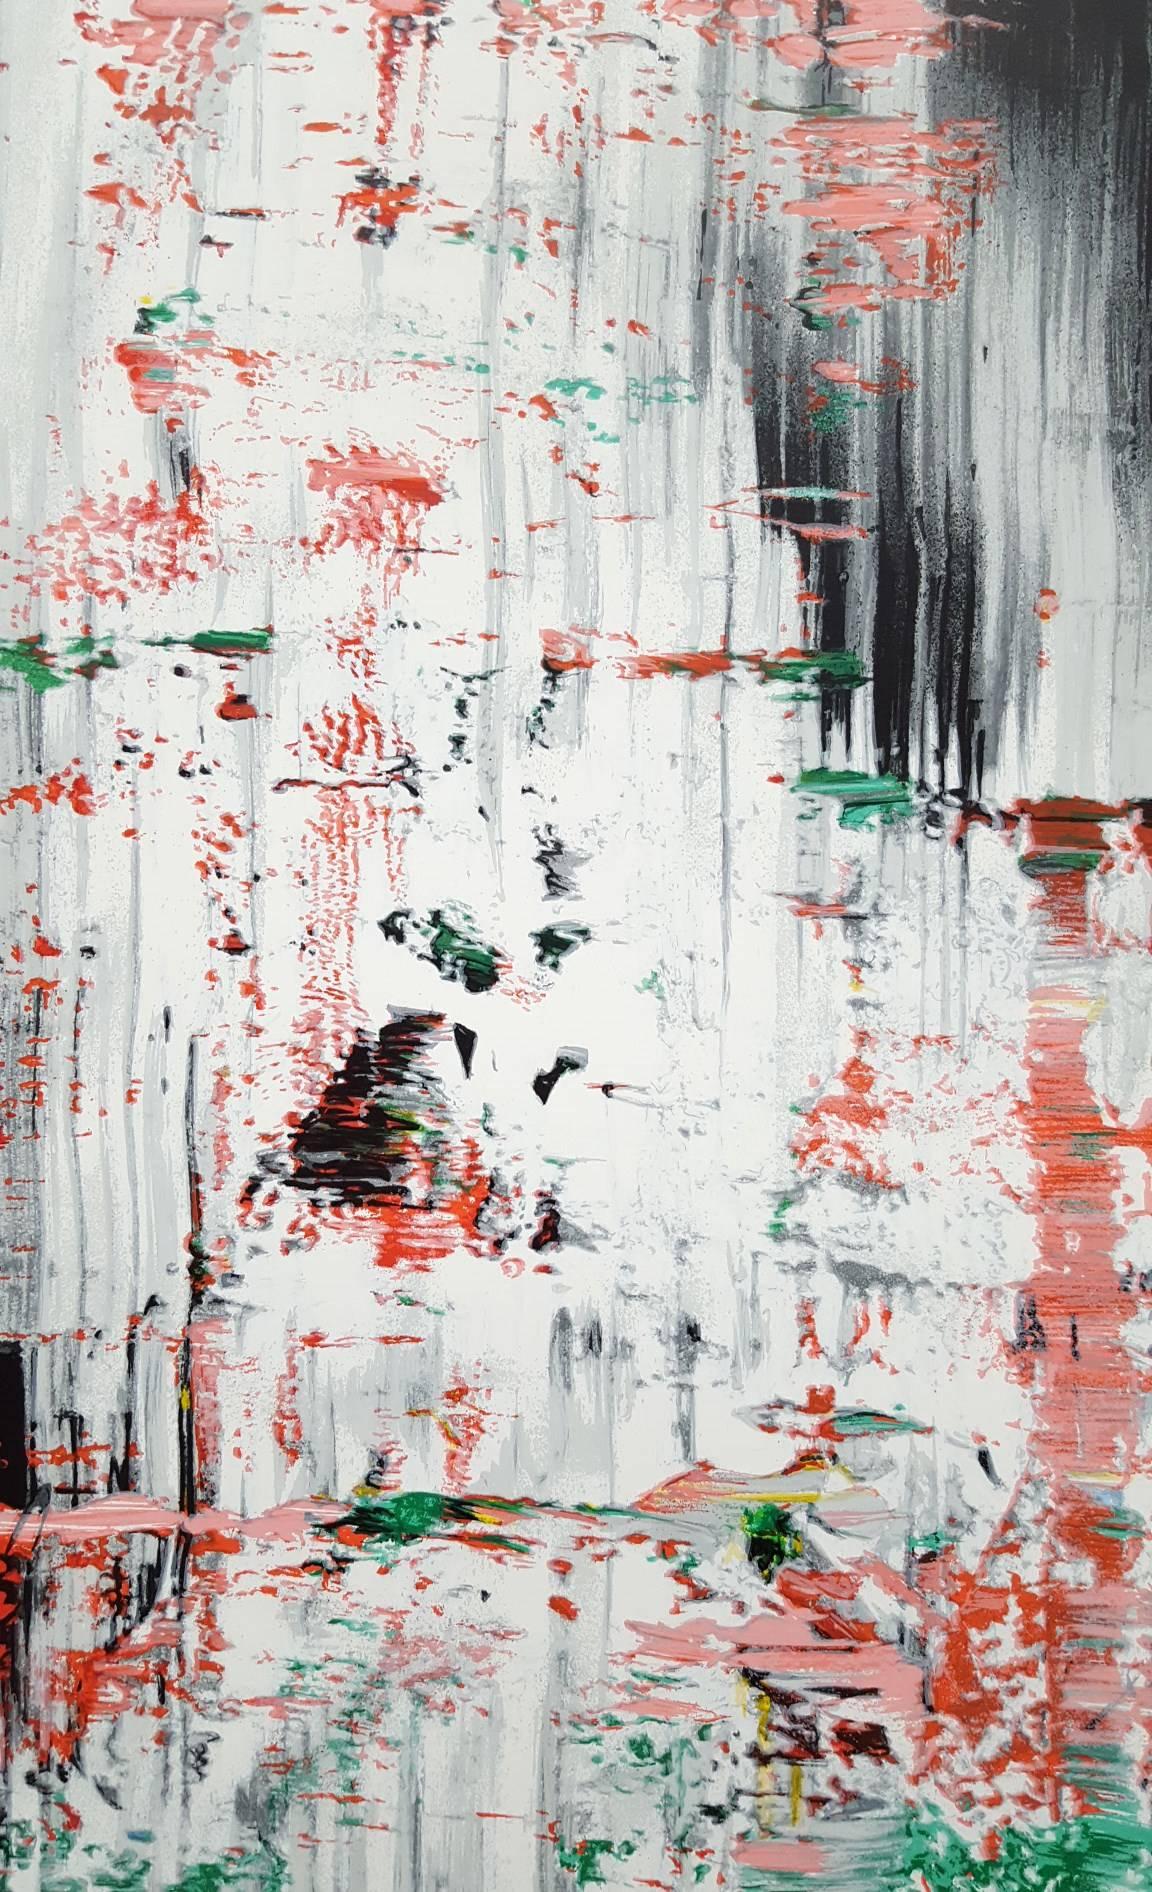 Eis 2, Ice 2 - Abstract Print by Gerhard Richter